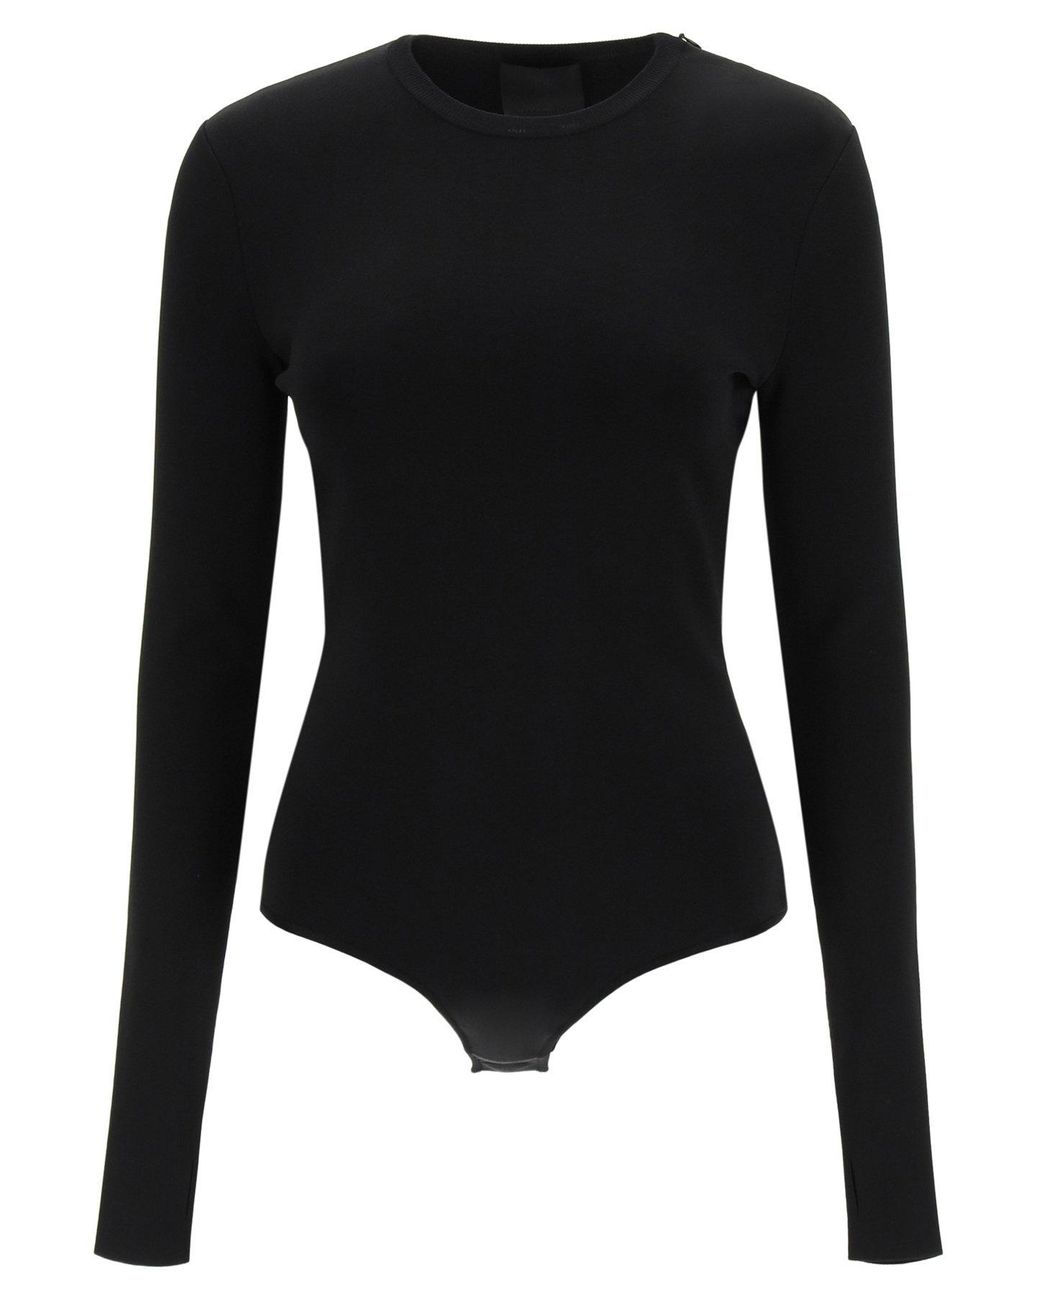 Givenchy Synthetic Bodysuit With Cut-out in Black - Save 12% - Lyst